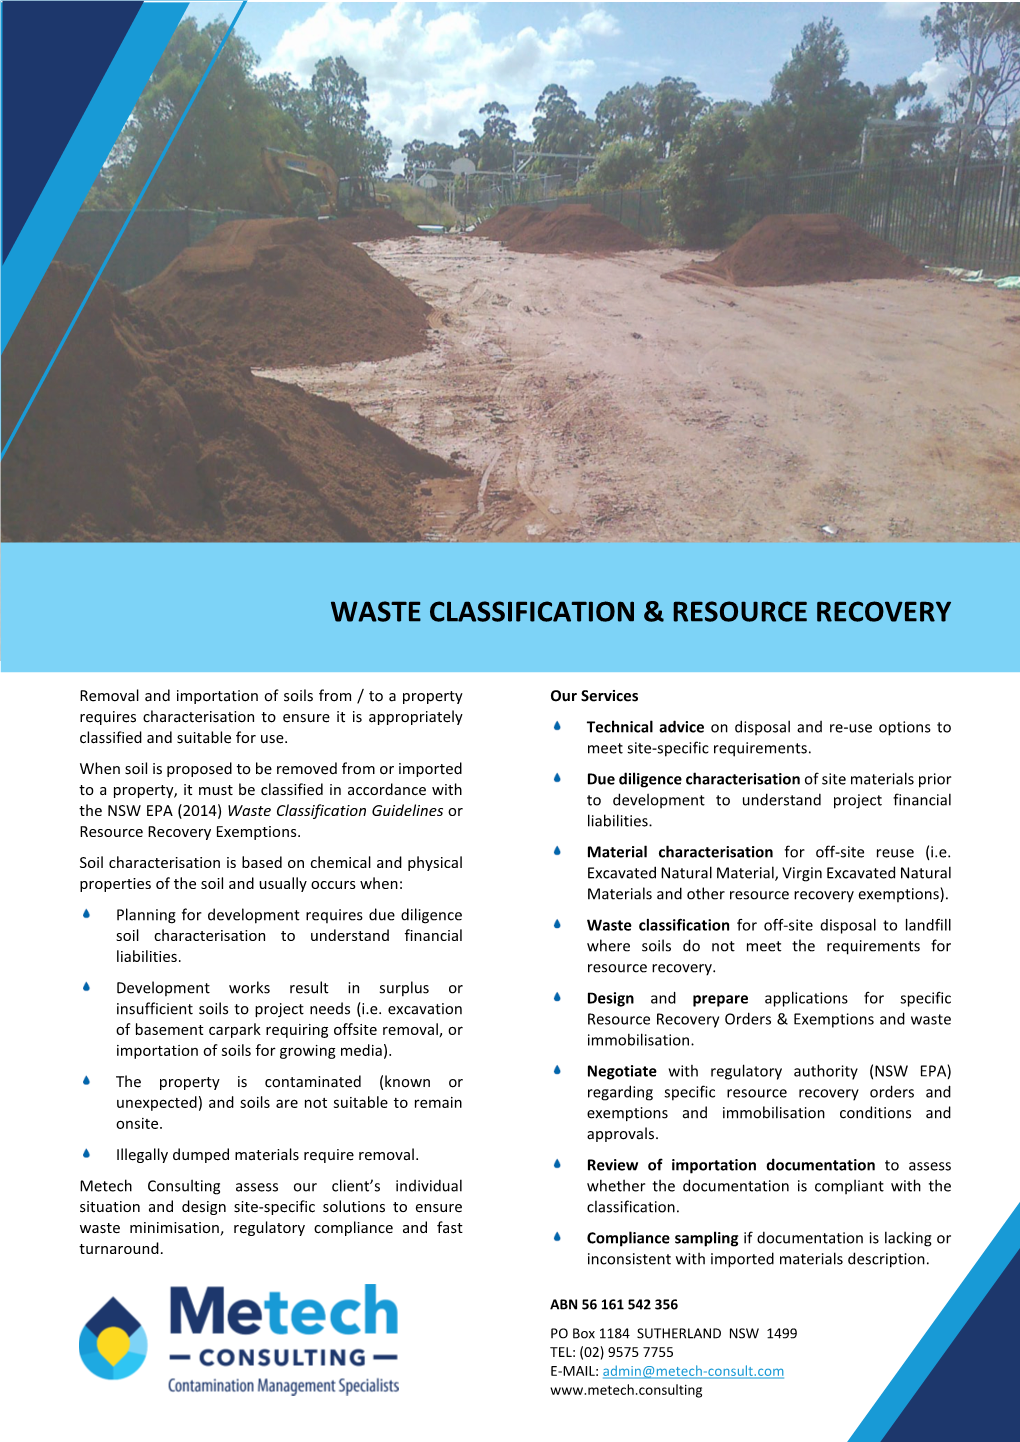 Waste Classification & Resource Recovery